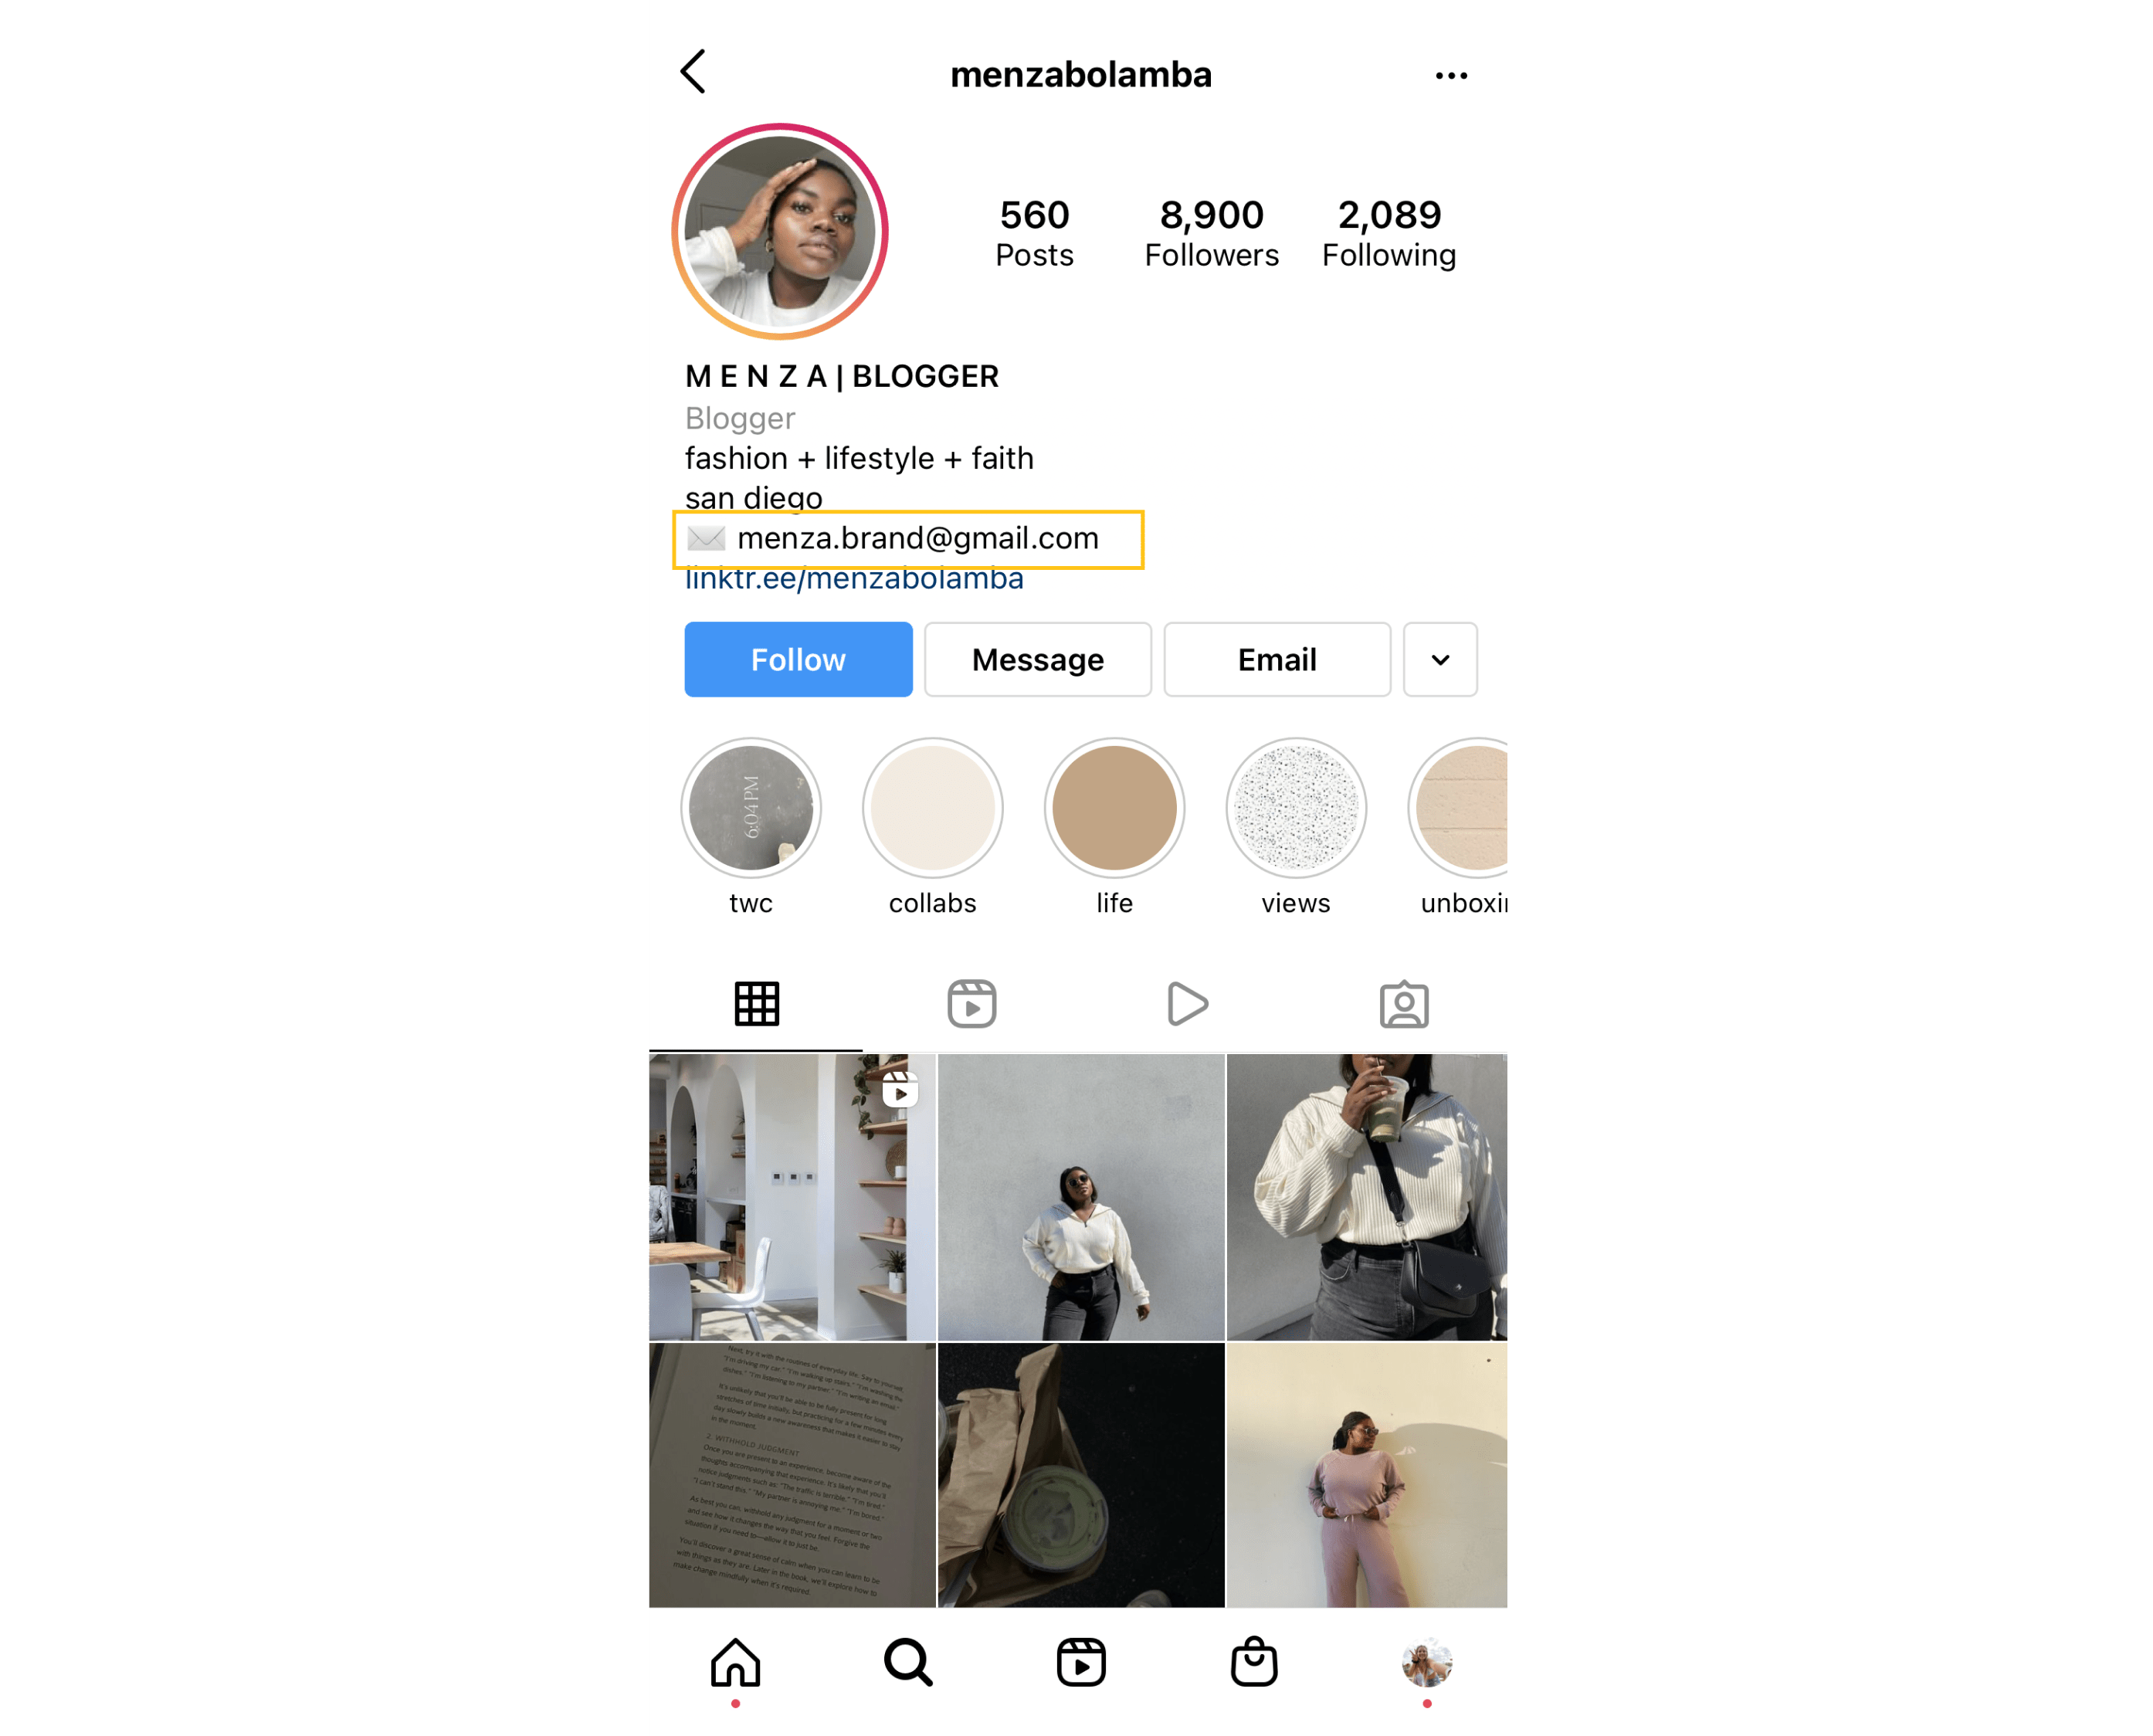 This photo shows the profile for fashion, lifestyle, and faith blogger, Menza, who works with beauty brand Summer Fridays. This screenshot emphasizes the email ‘menza.brand@gmail.com’ included in the bio.